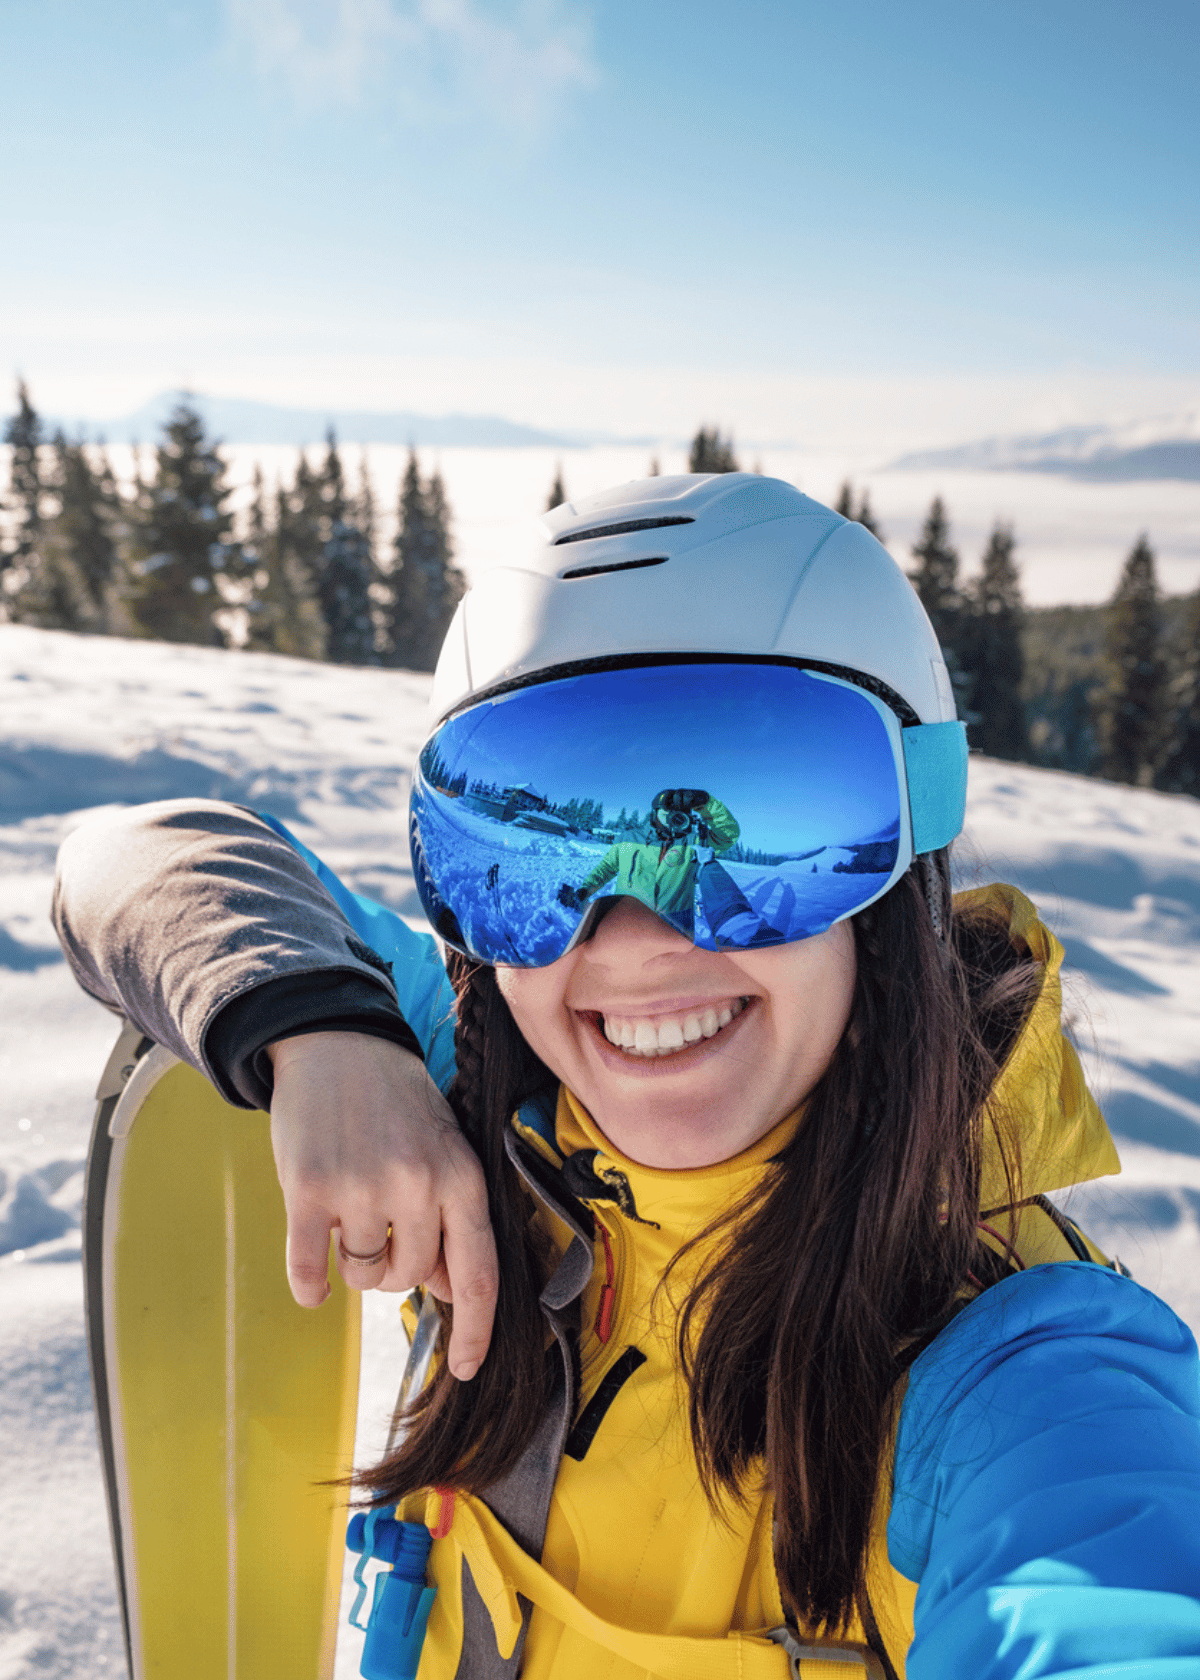 Best Ski Goggles for Every Budget: Our Top 5 Picks